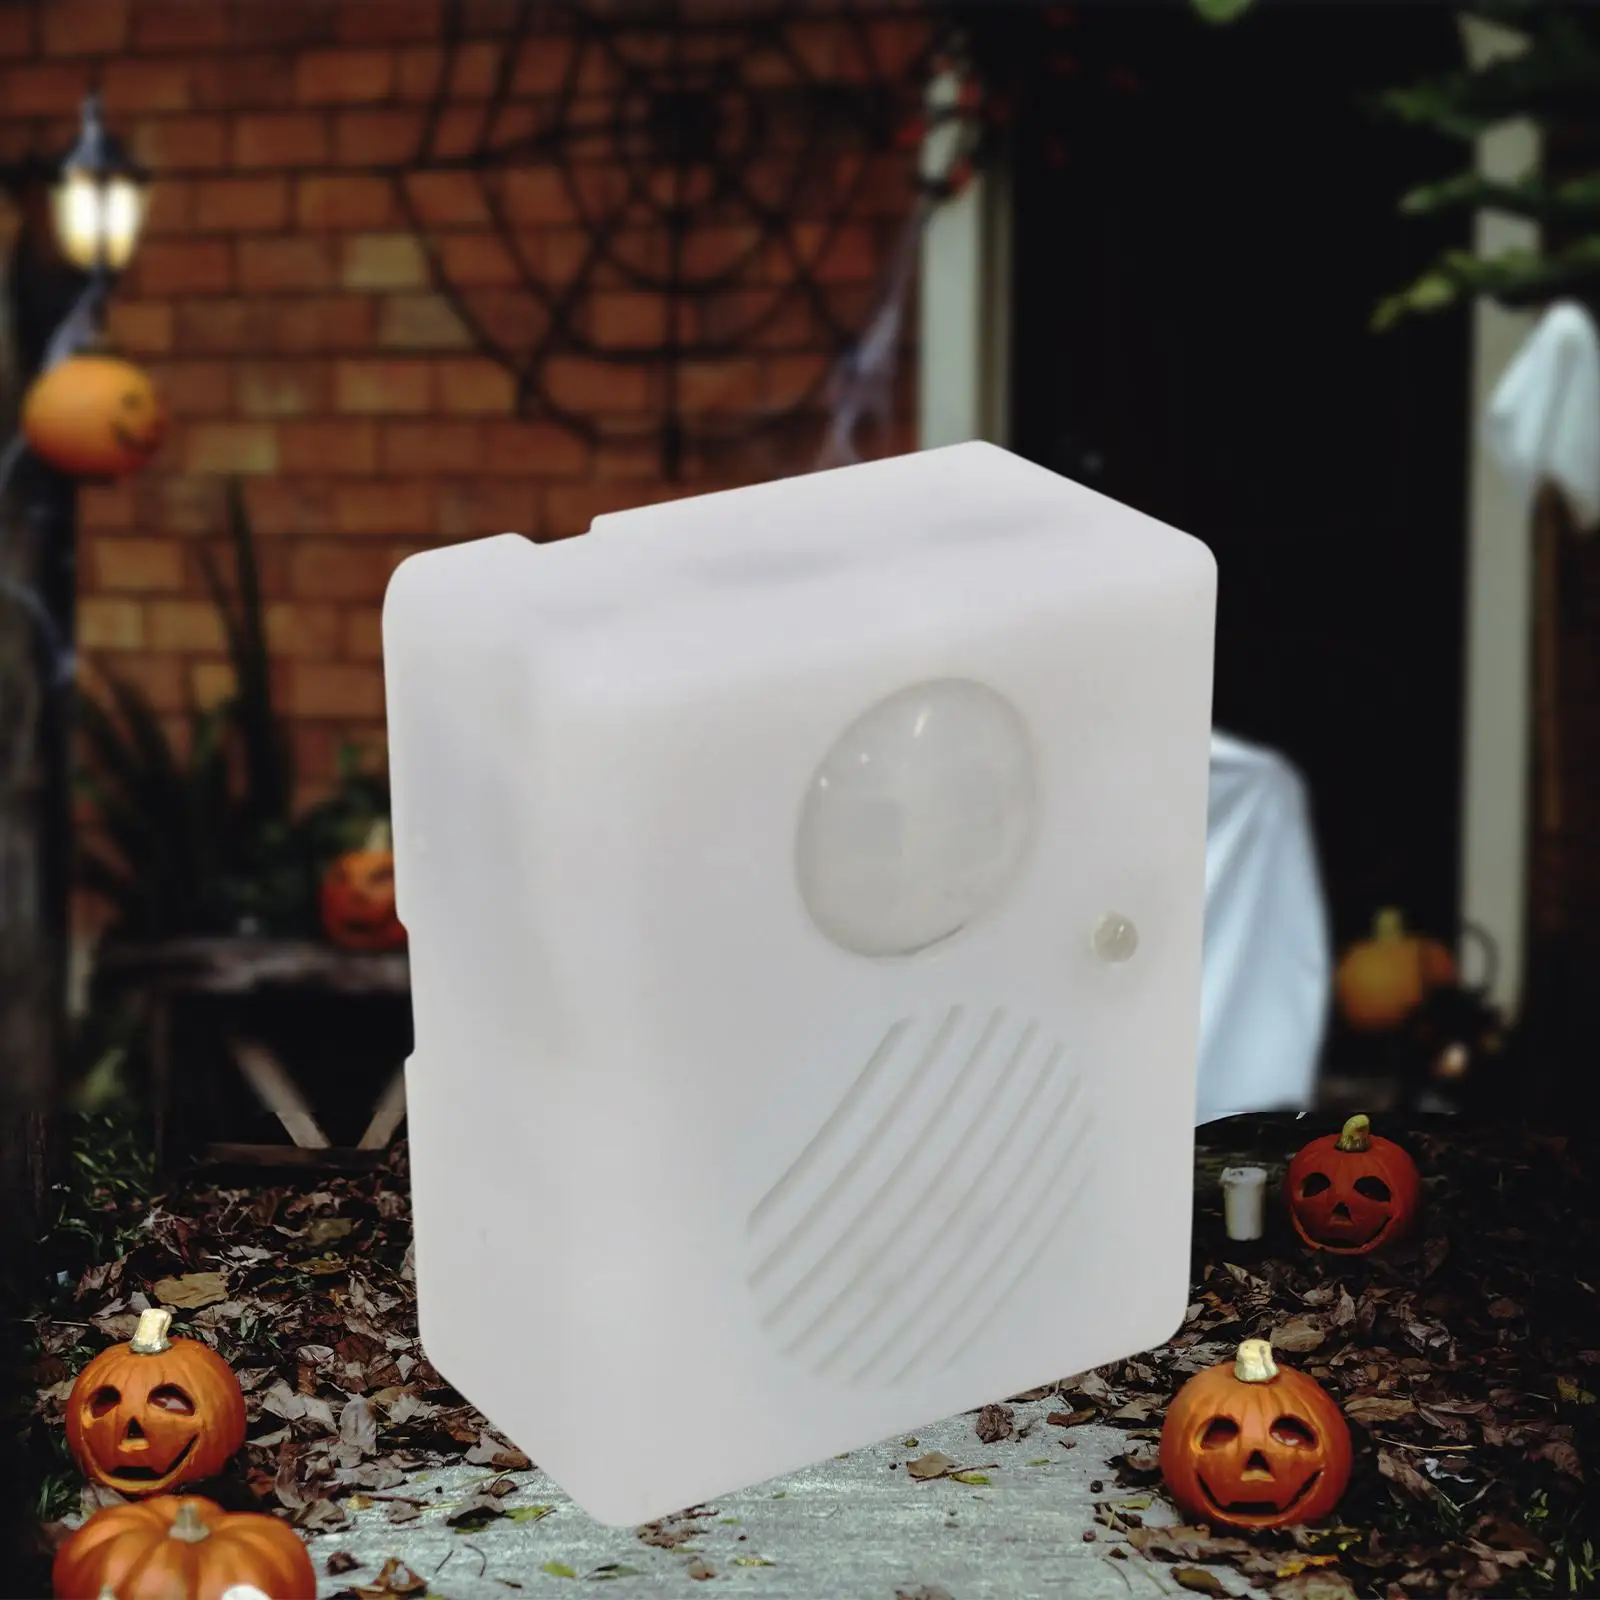 Funny Halloween Sound Sensor Tricky Voice Activated Props Screaming Speaker for Hallways Home